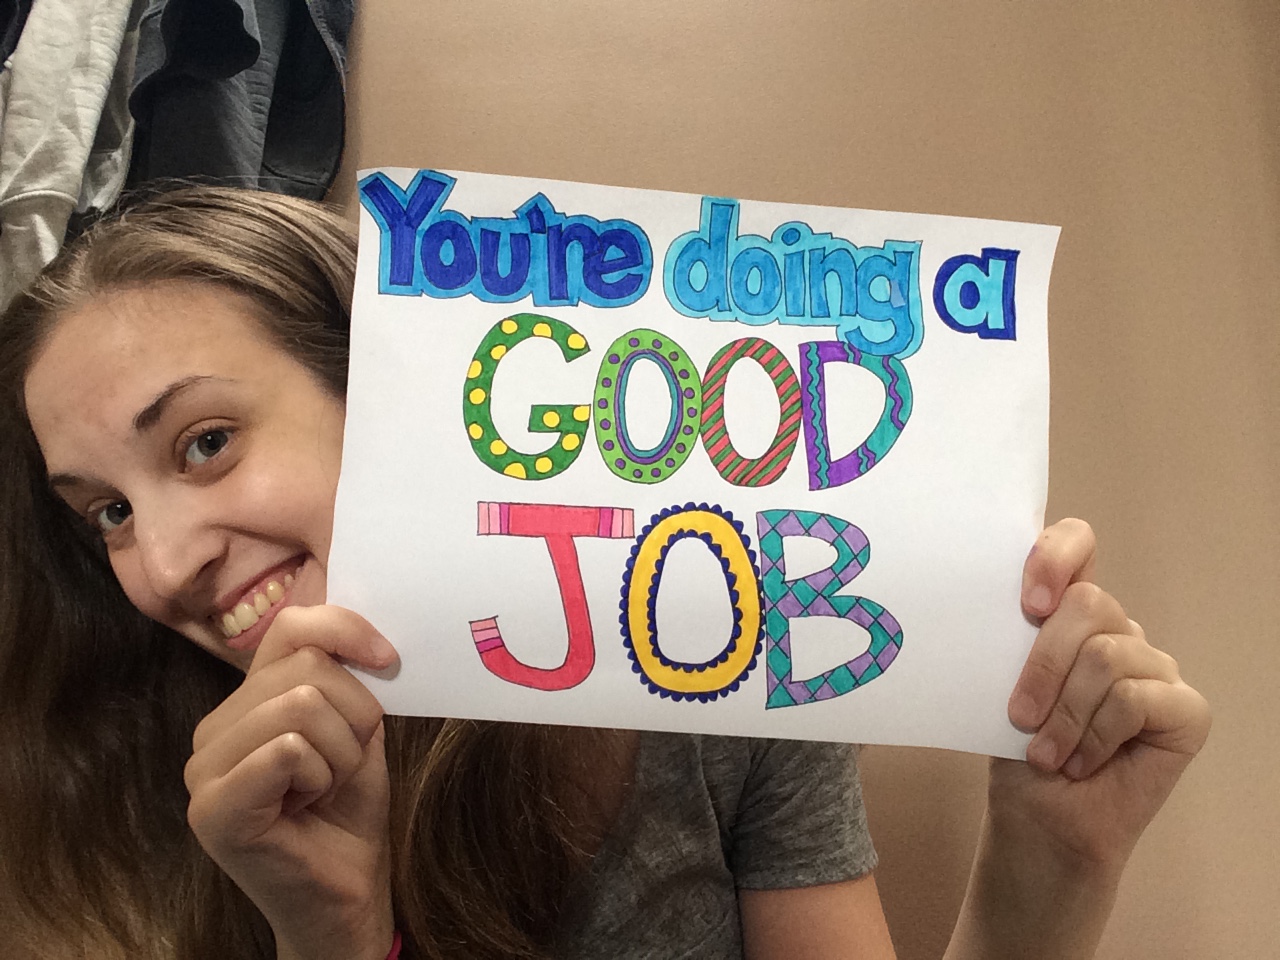 You're doing a good job | Finding my Miracle